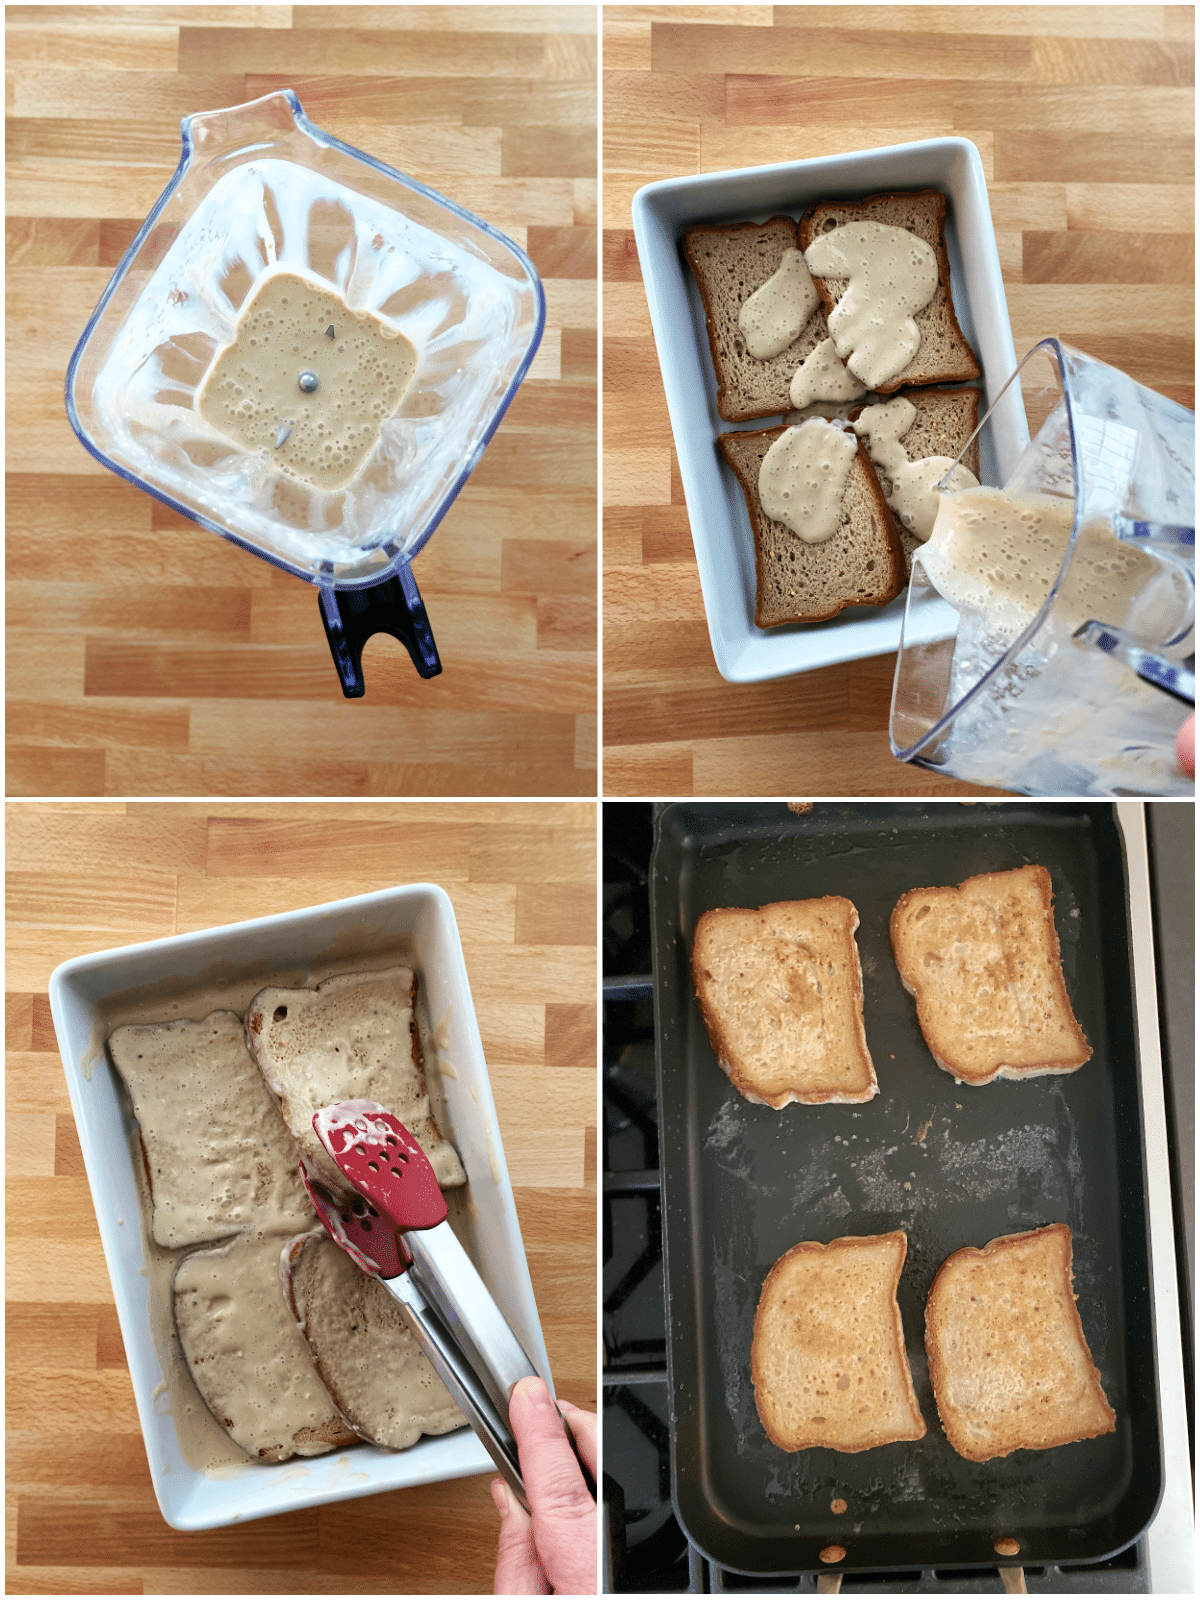 A four photo collage shows how to make Baileys Irish cream French toast: blend custard, pour custard over bread slices, coat bread completely, and cook on a griddle.